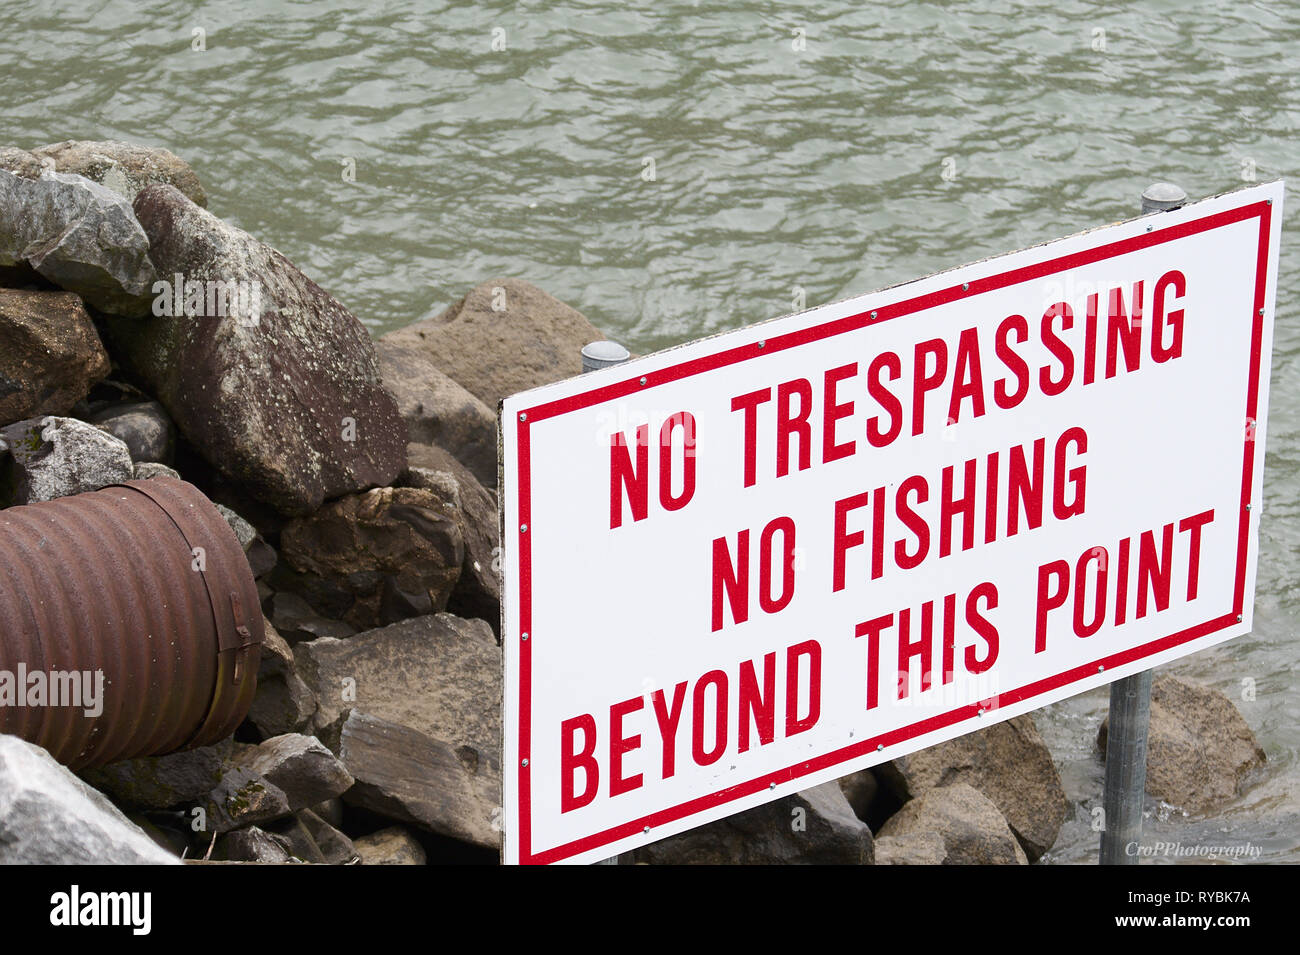 No trespassing and fishing sign near large drainage pipe Stock Photo